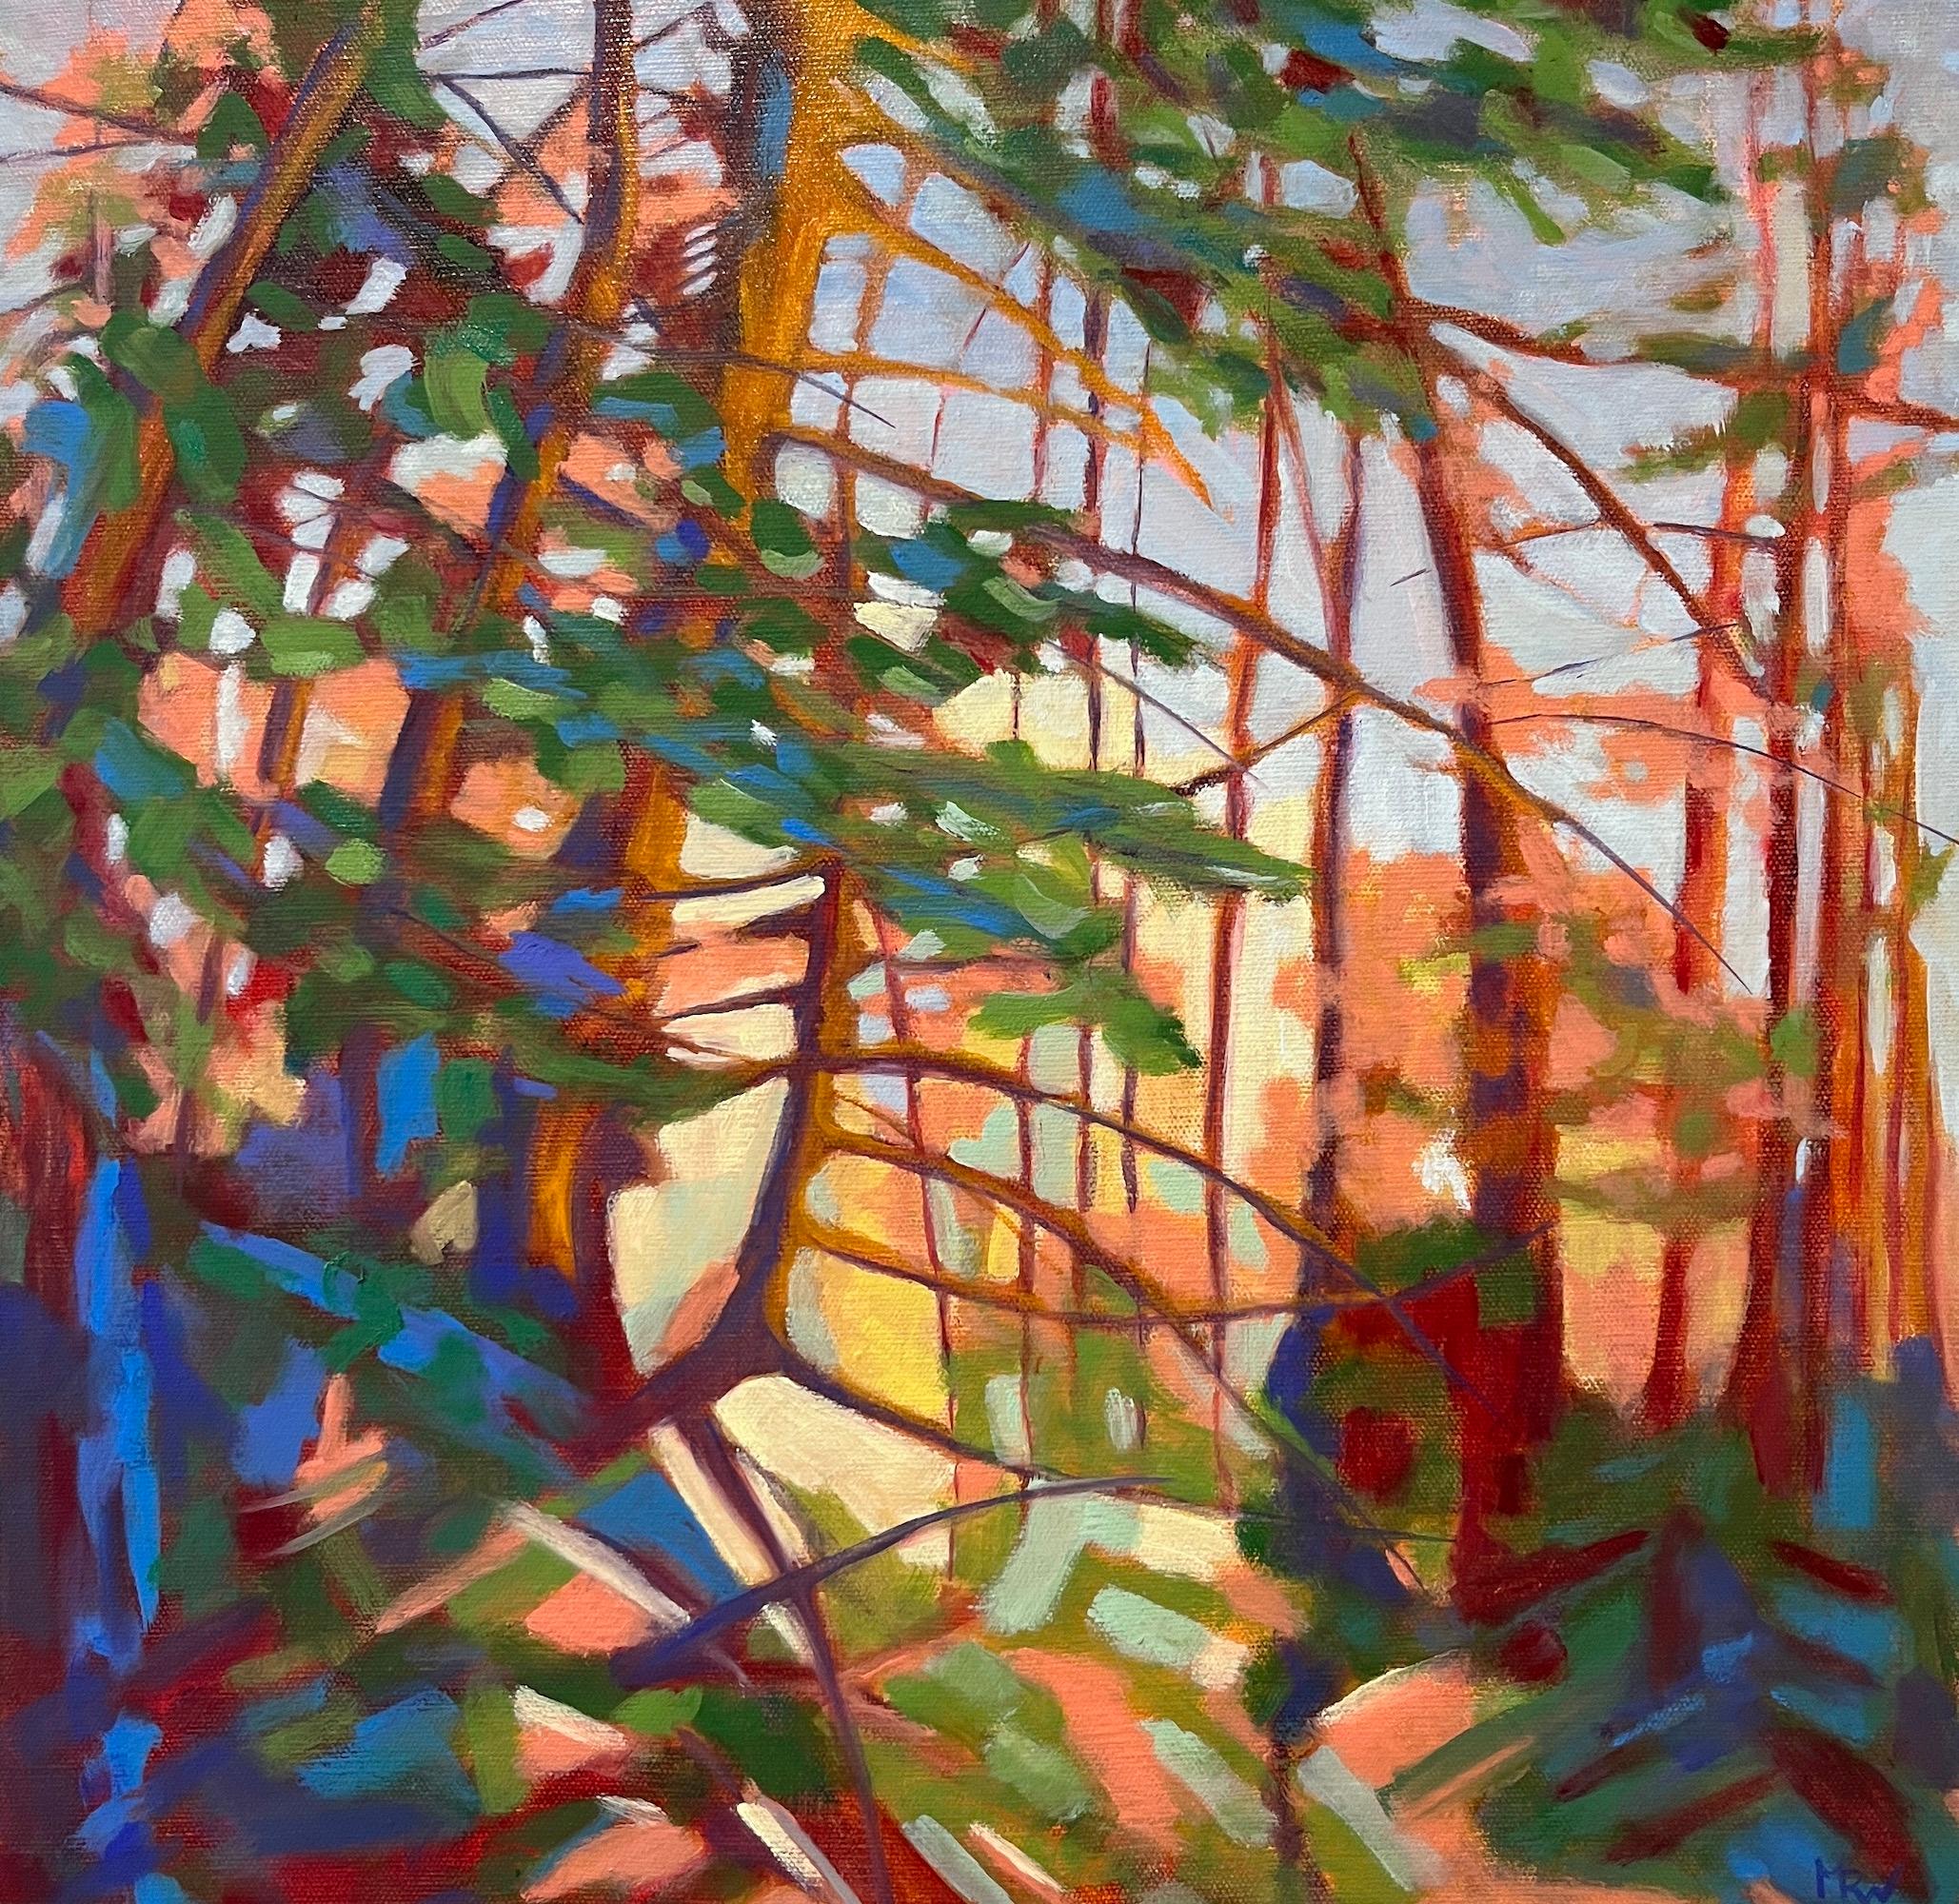 Marcia Wise Landscape Painting - "Pizzicato", contemporary, landscape, yellow, orange, blue, green, oil painting